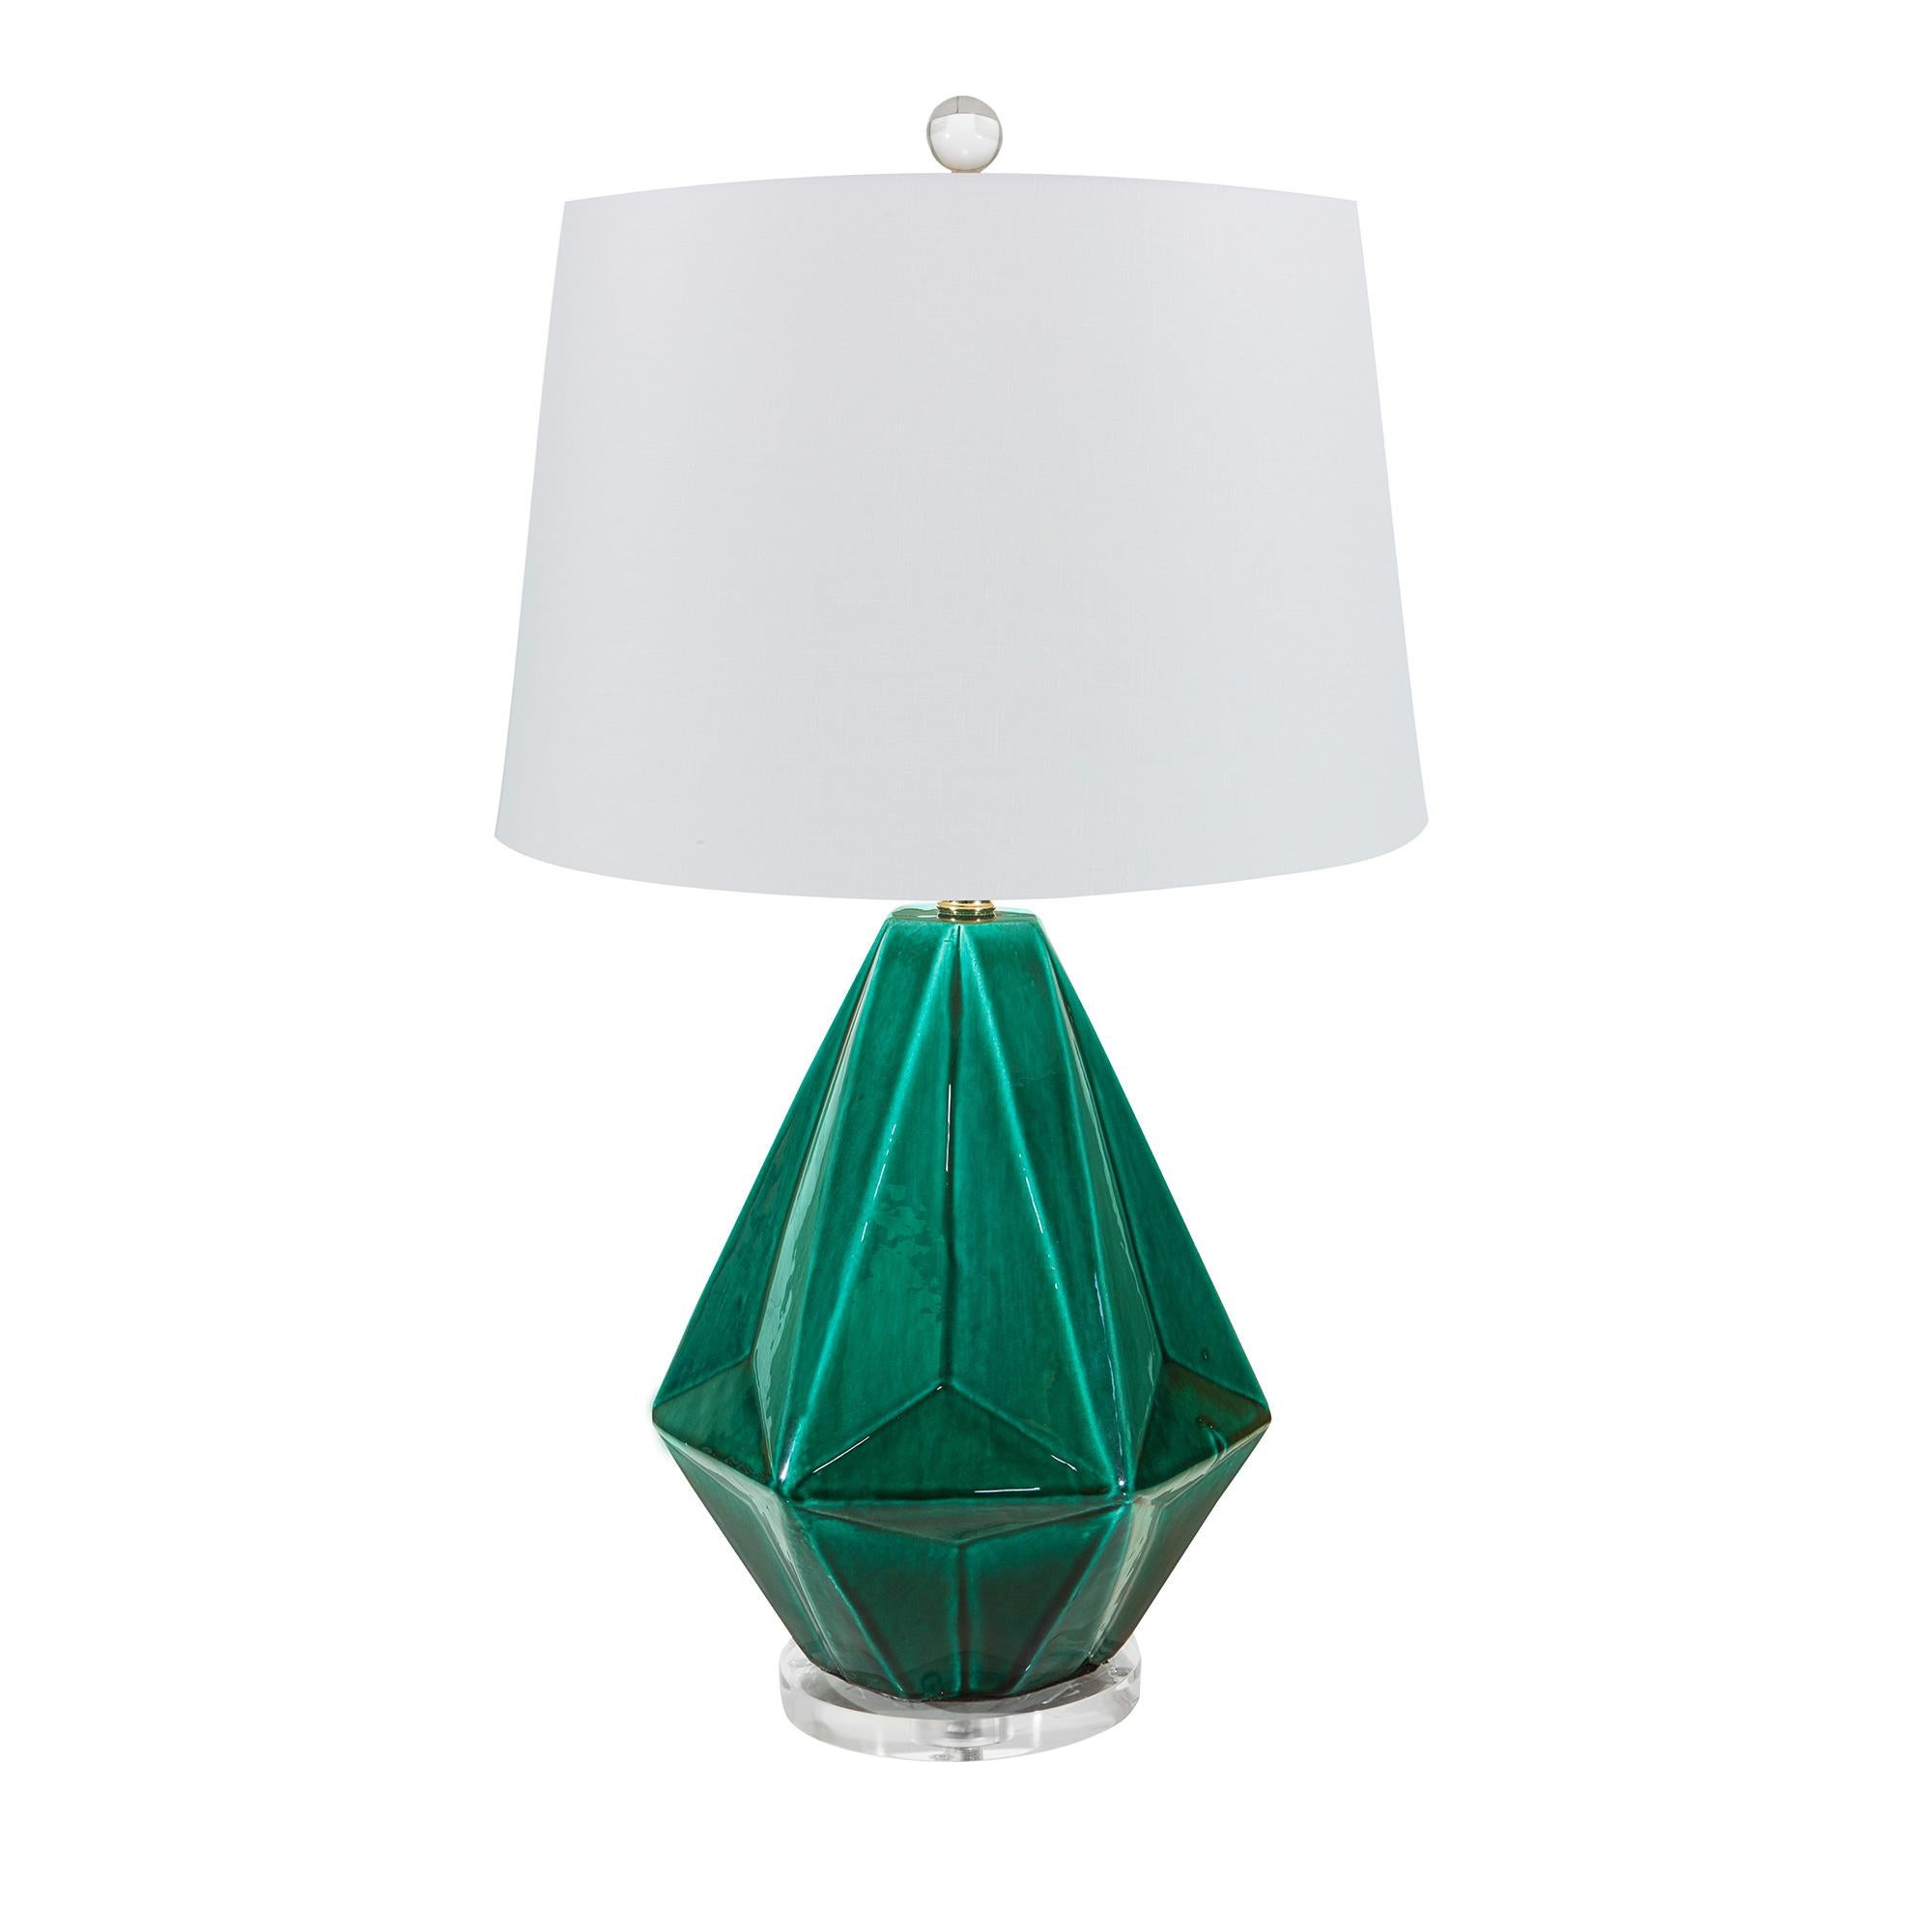 For Sale: Green (QR-16105.FOREST.0) Liza Faceted Ceramic Table Lamp with Ivory Linen Shade by CuratedKravet